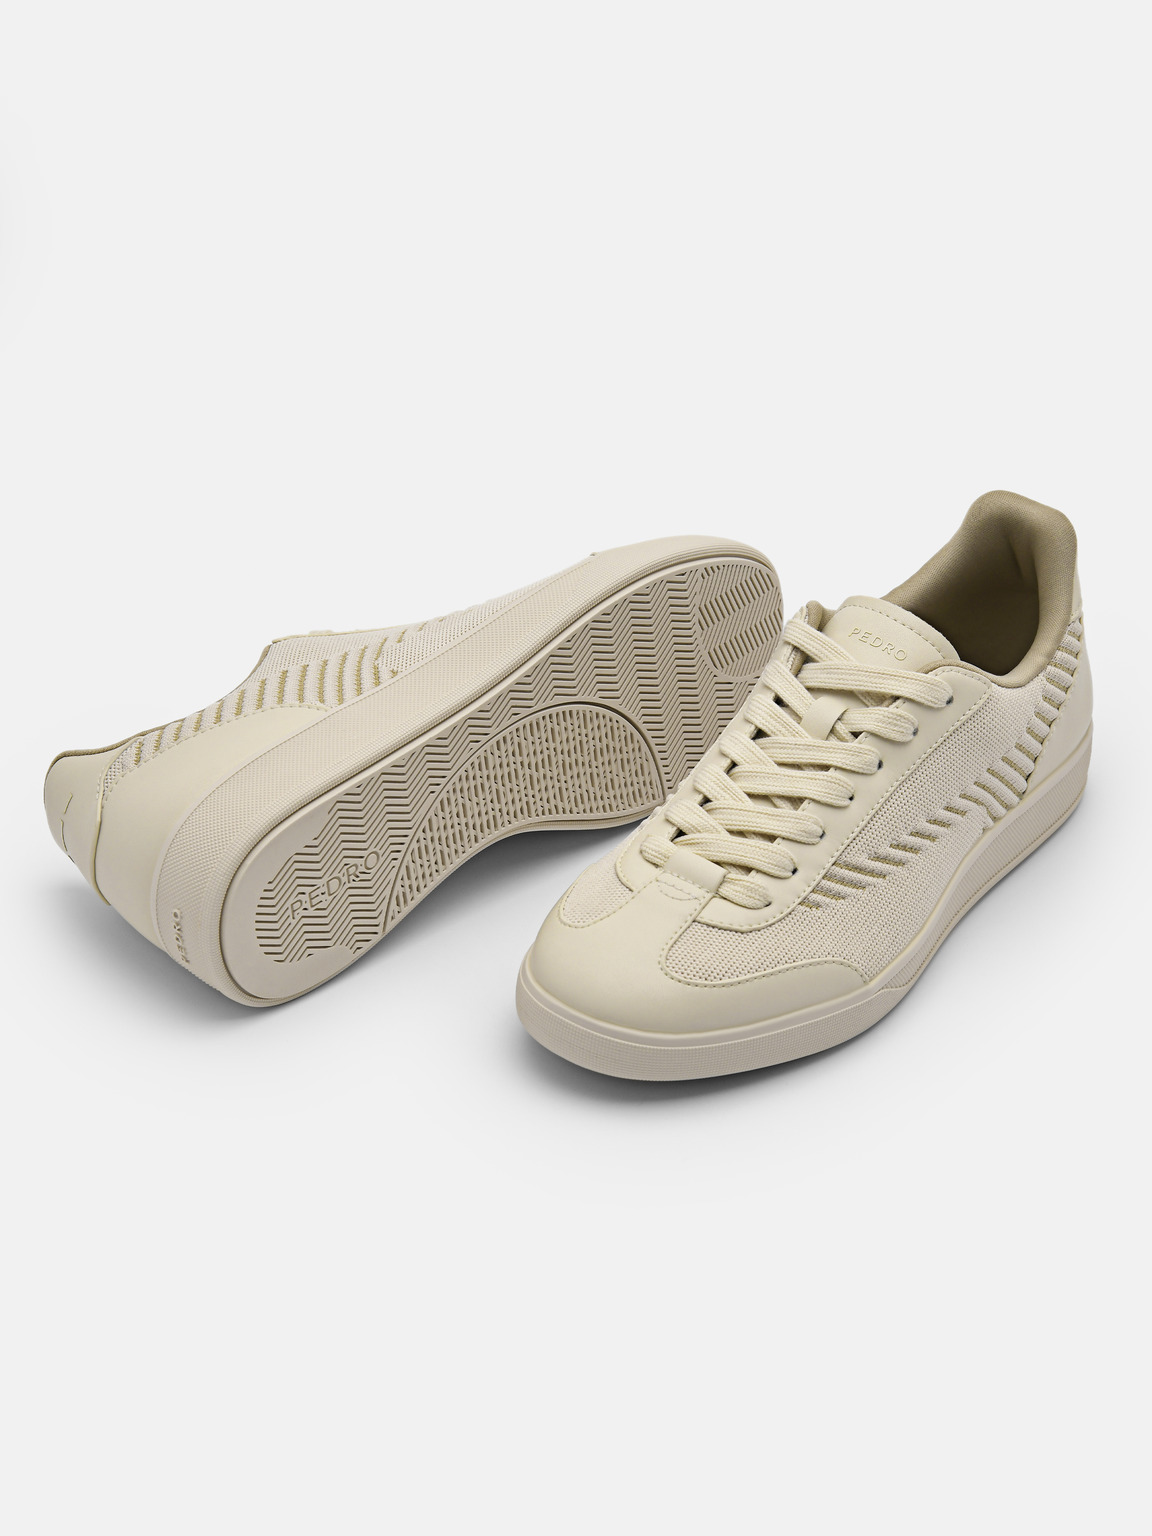 rePEDRO Knitted Sneakers, Sand